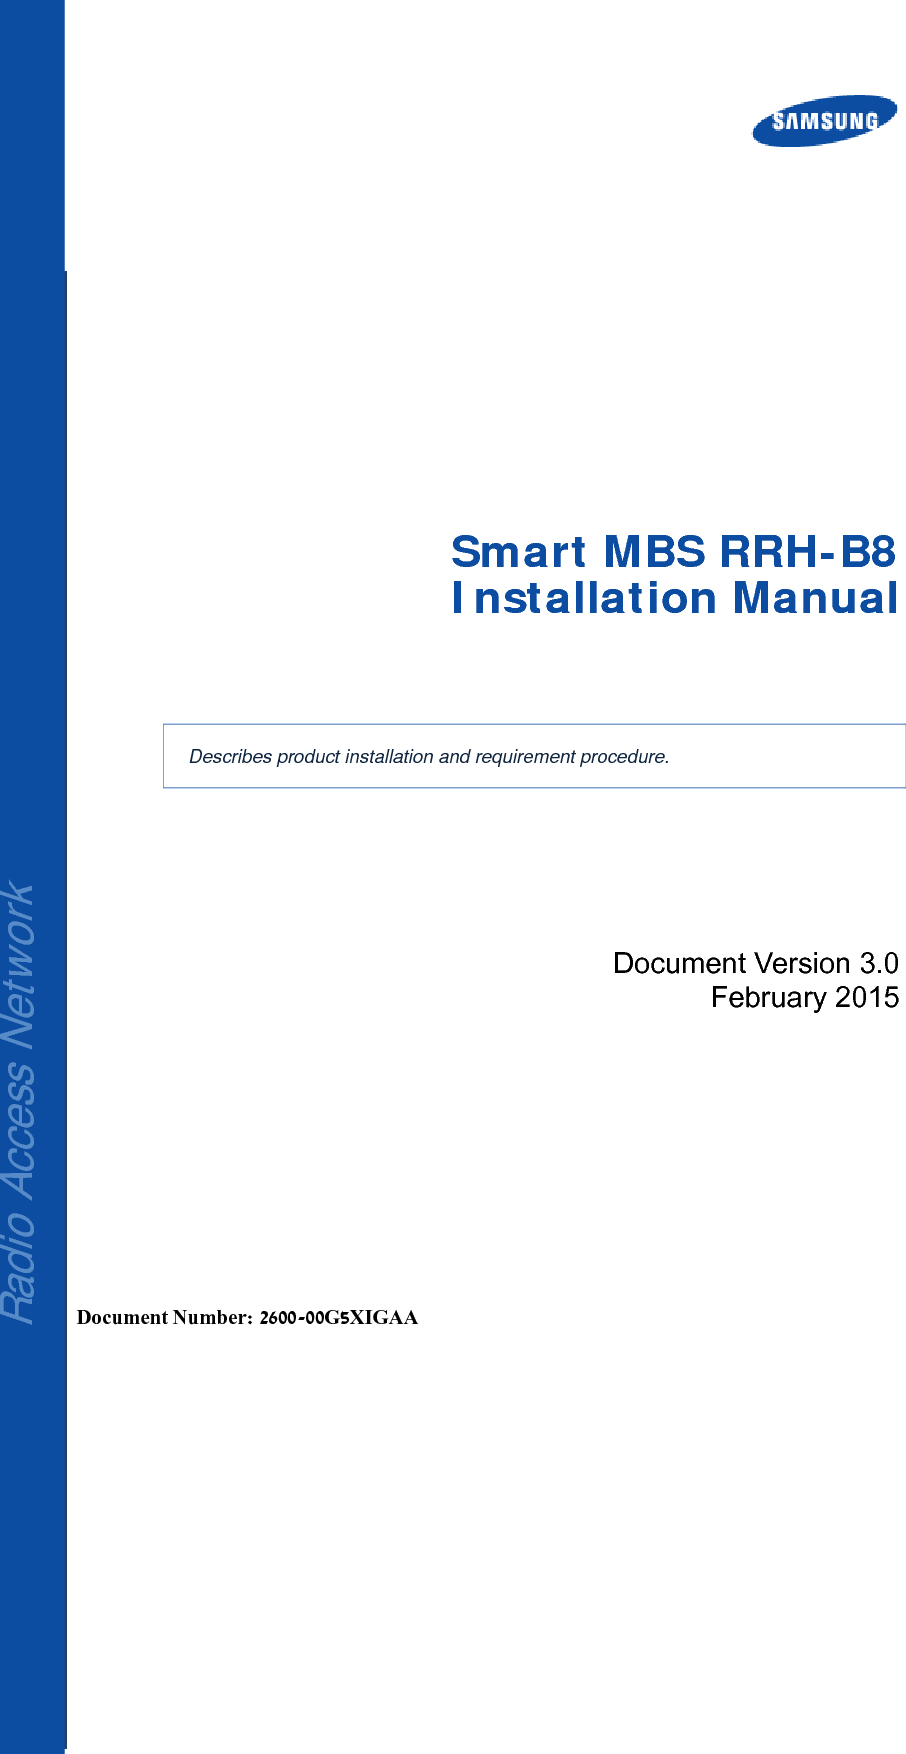     Radio Access Network  Smart MBS RRH-B8Installation Manual  Describes product installation and requirement procedure. Document Version 3.0 February 2015      Document Number: 2600-00G5XIGAA 